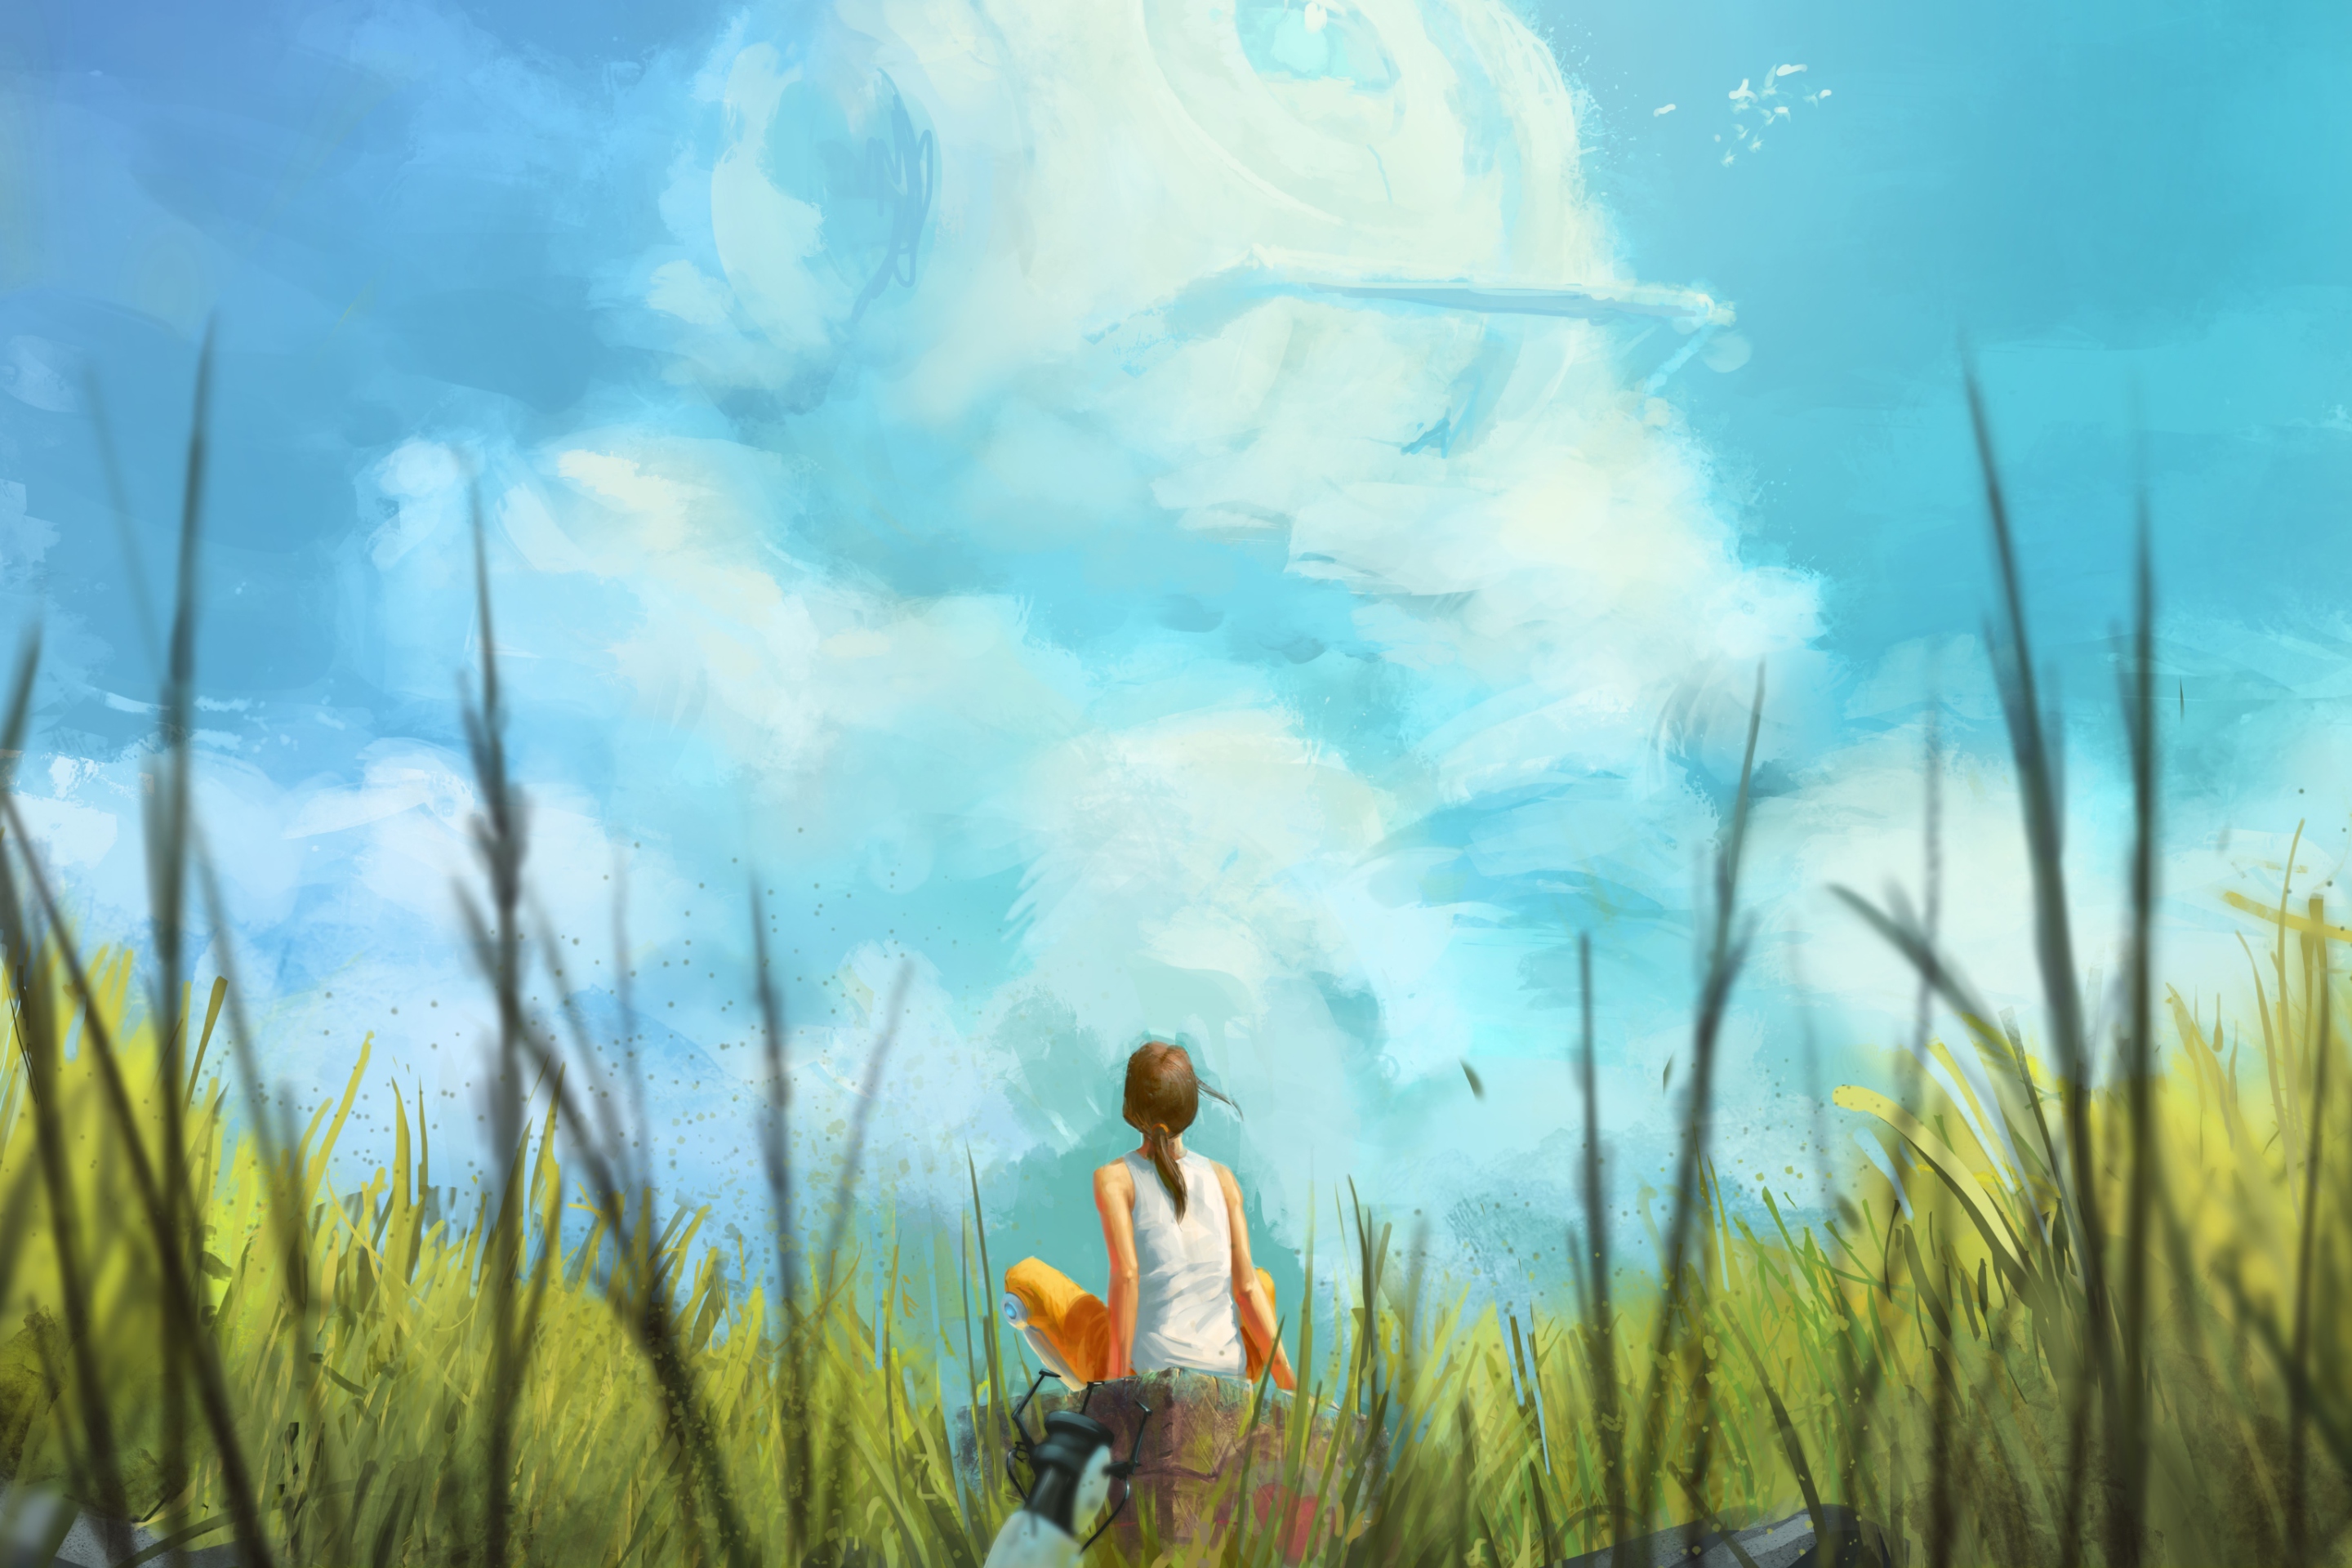 Das Painting Of Girl, Green Field And Blue Sky Wallpaper 2880x1920